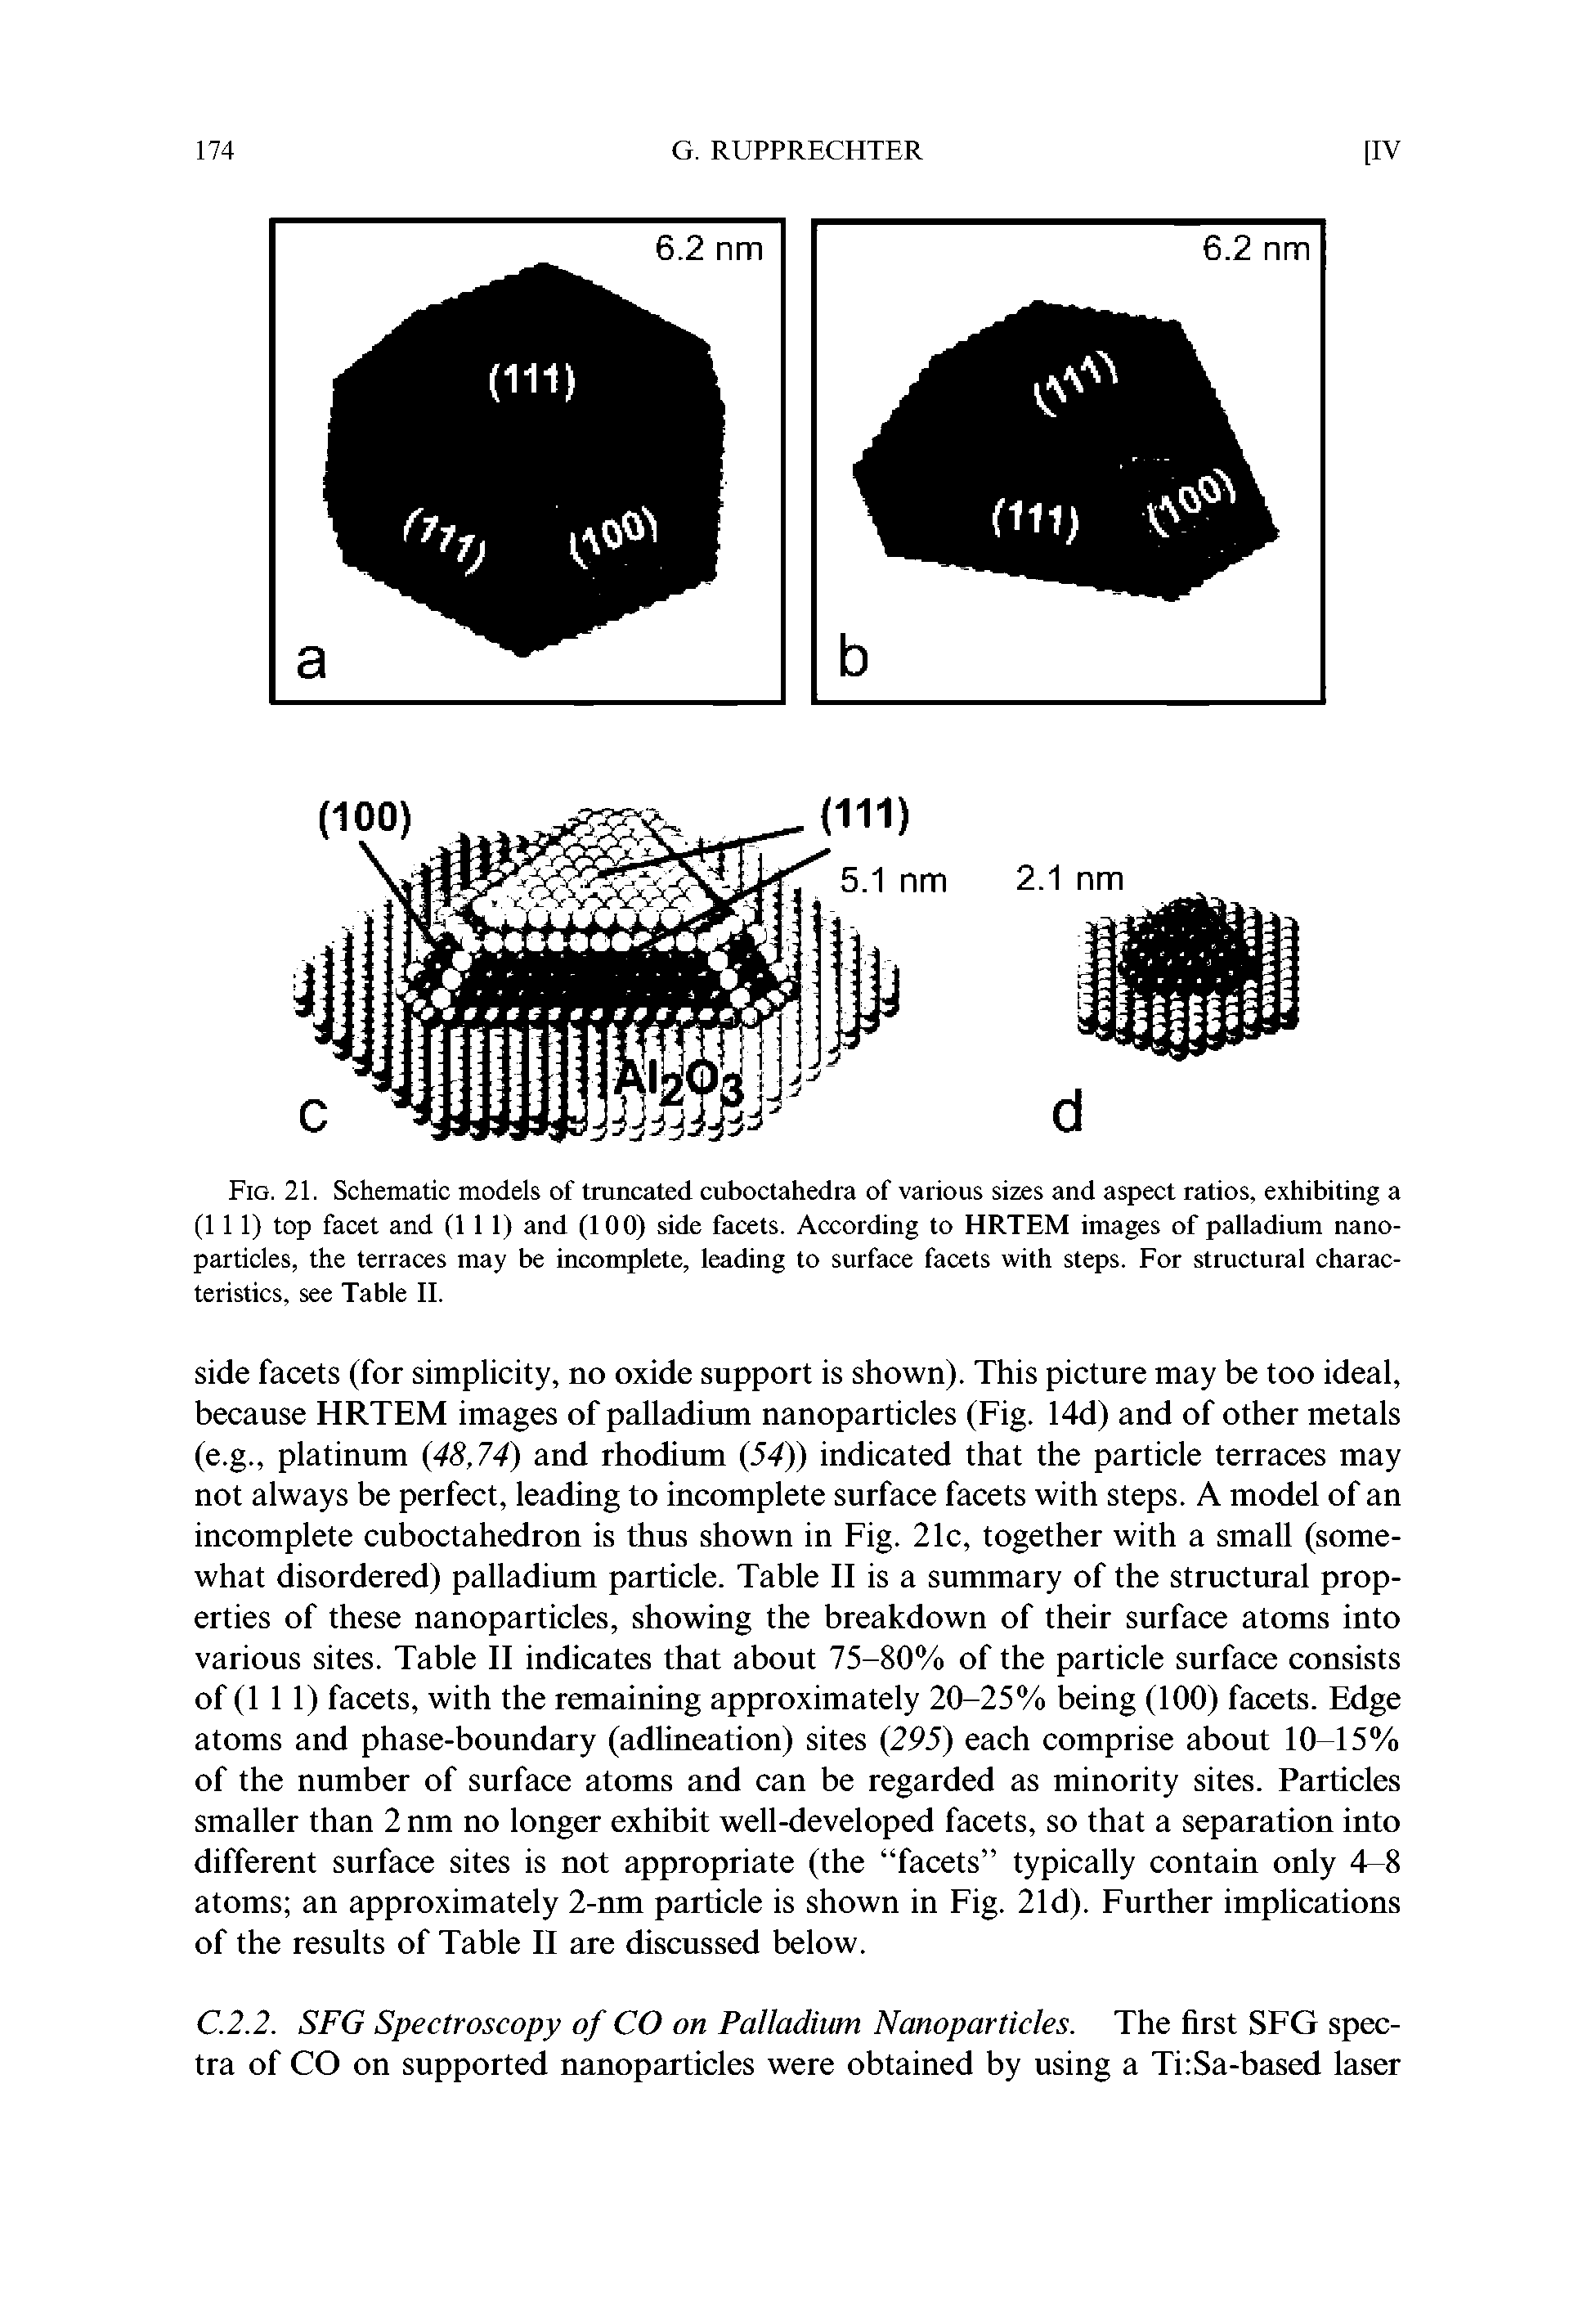 Fig. 21. Schematic models of truncated cuboctahedra of various sizes and aspect ratios, exhibiting a (111) top facet and (1 1 1) and (100) side facets. According to HRTEM images of palladium nanoparticles, the terraces may be incomplete, leading to surface facets with steps. For structural characteristics, see Table II.